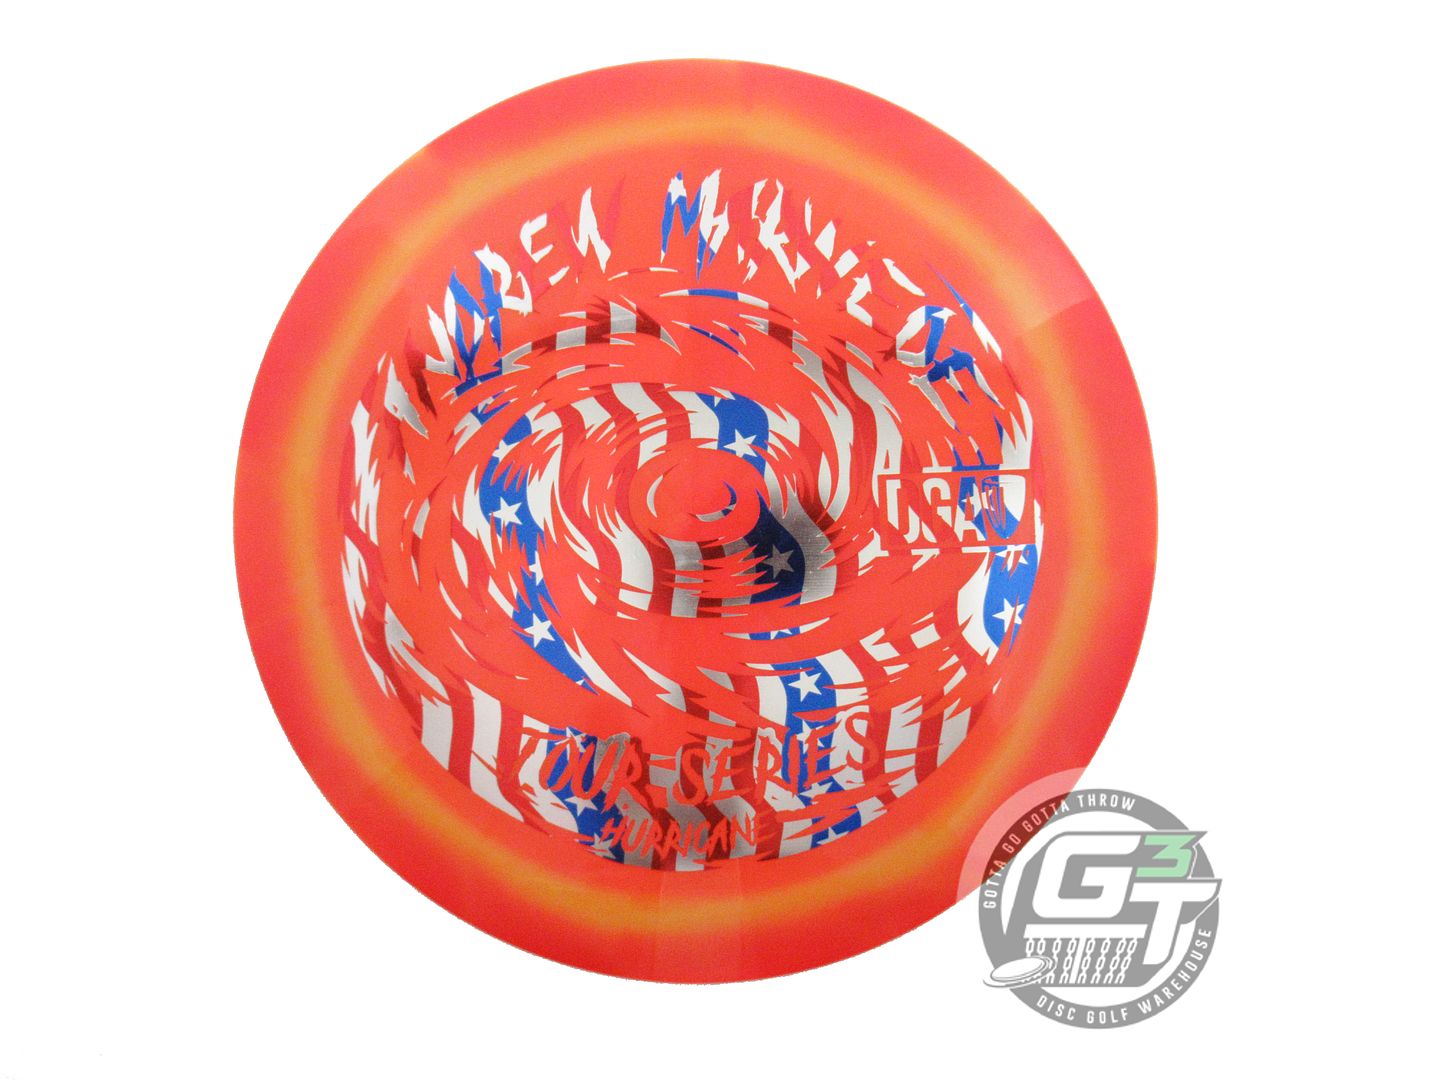 DGA Limited Edition 2023 Tour Series Andrew Marwede Swirl Tour Series Hurricane Distance Driver Golf Disc (Individually Listed)